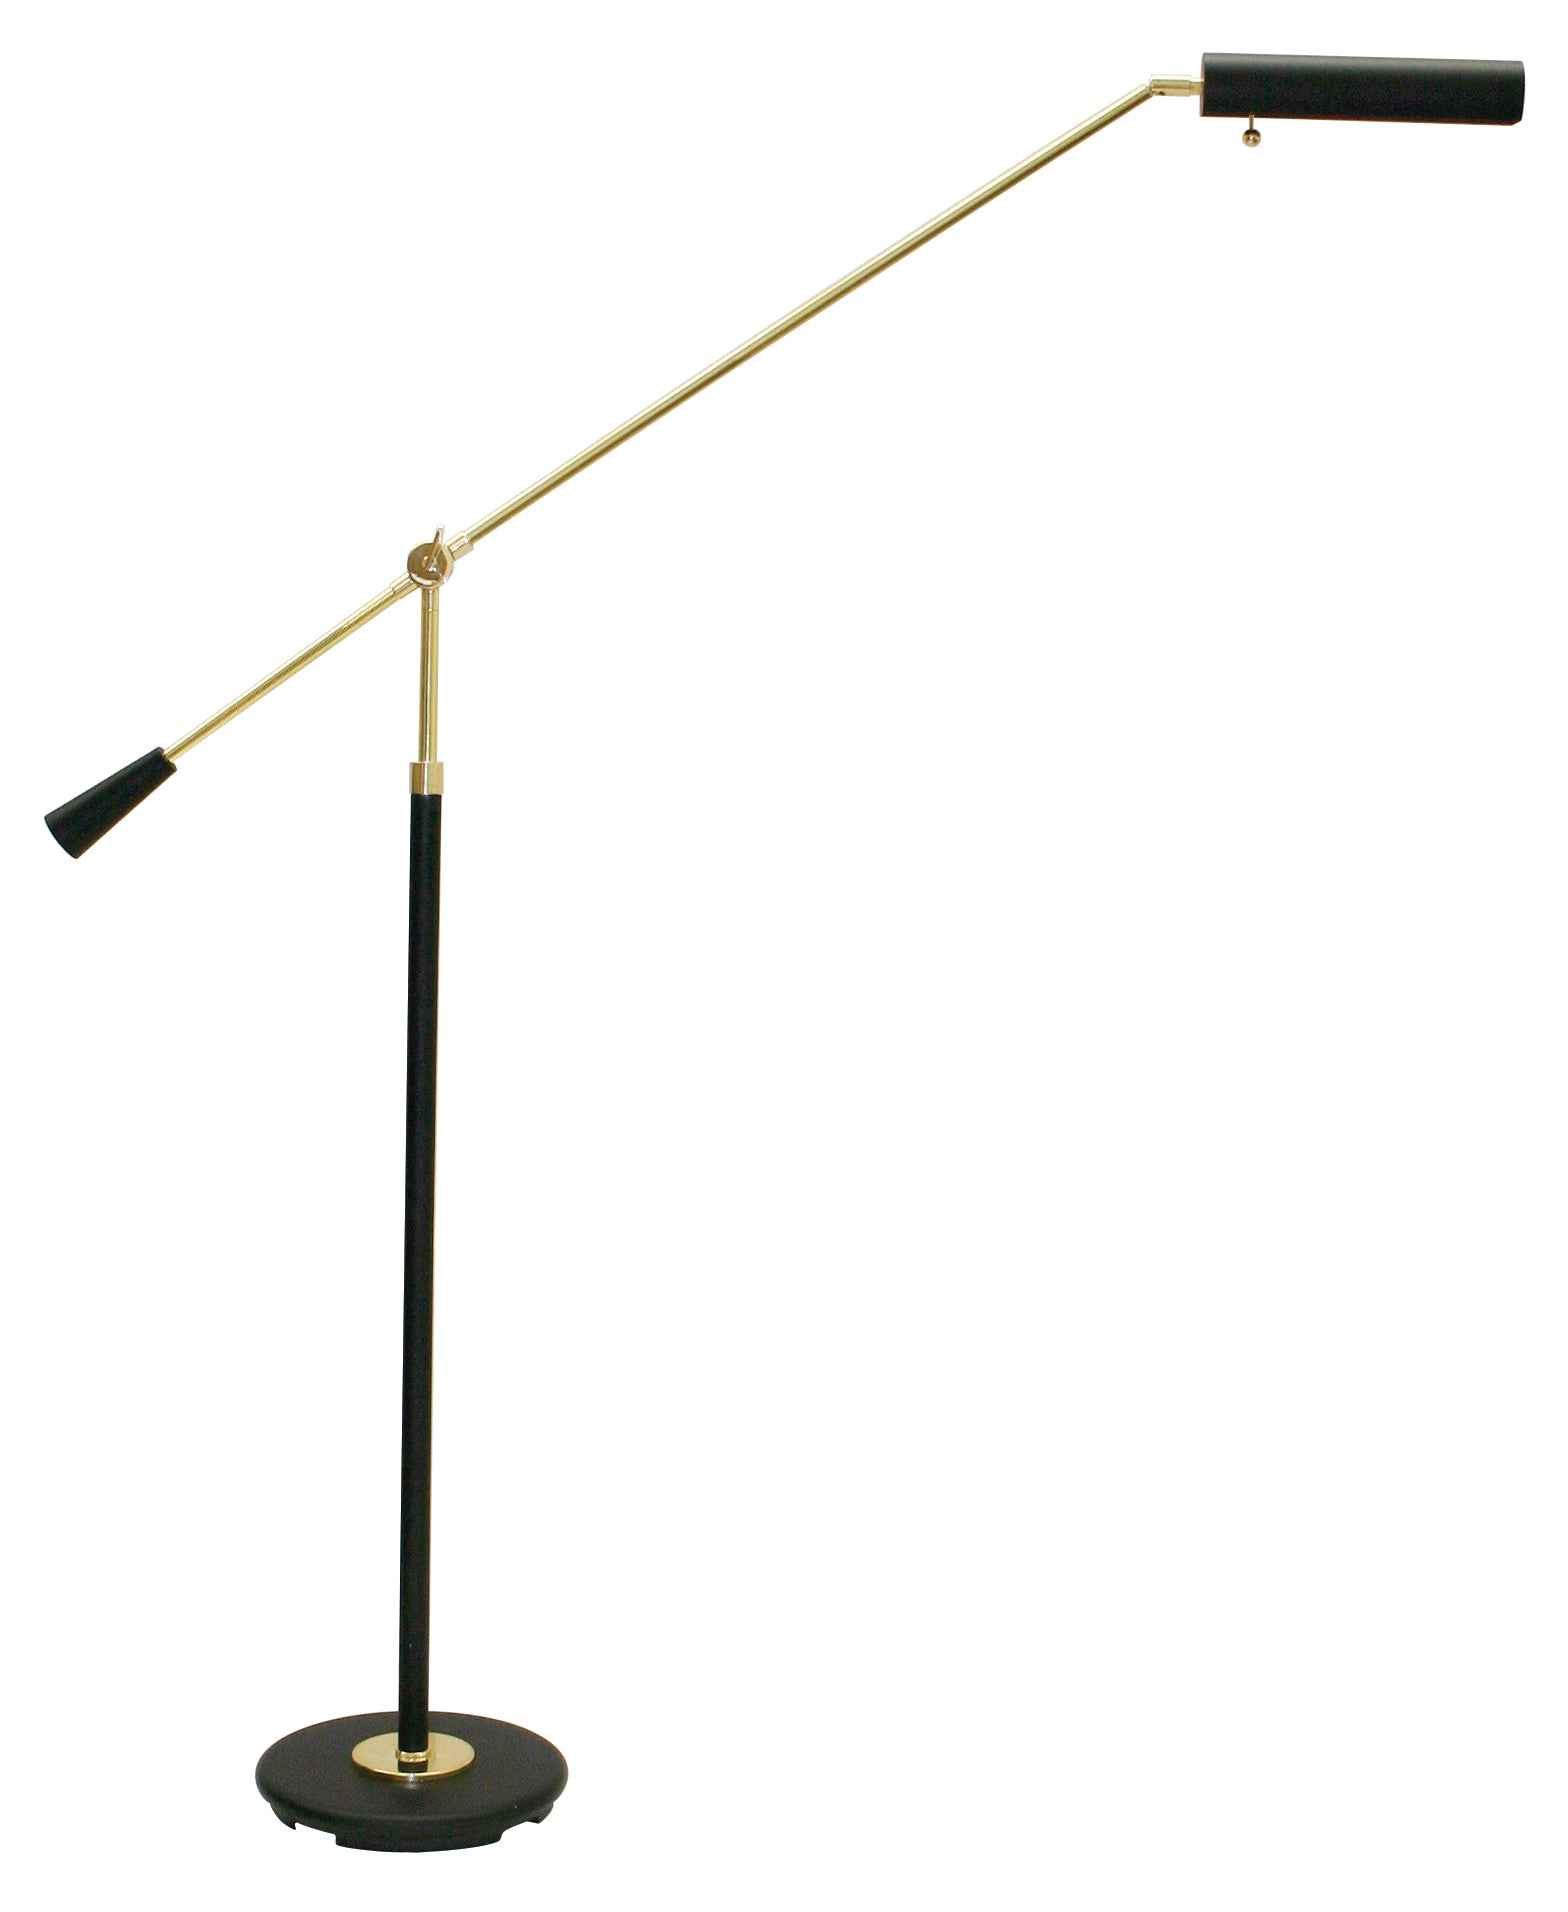 House of Troy Grand Piano Counter Balance Floor Lamp in Black with Polished Brass Accents PFL-617